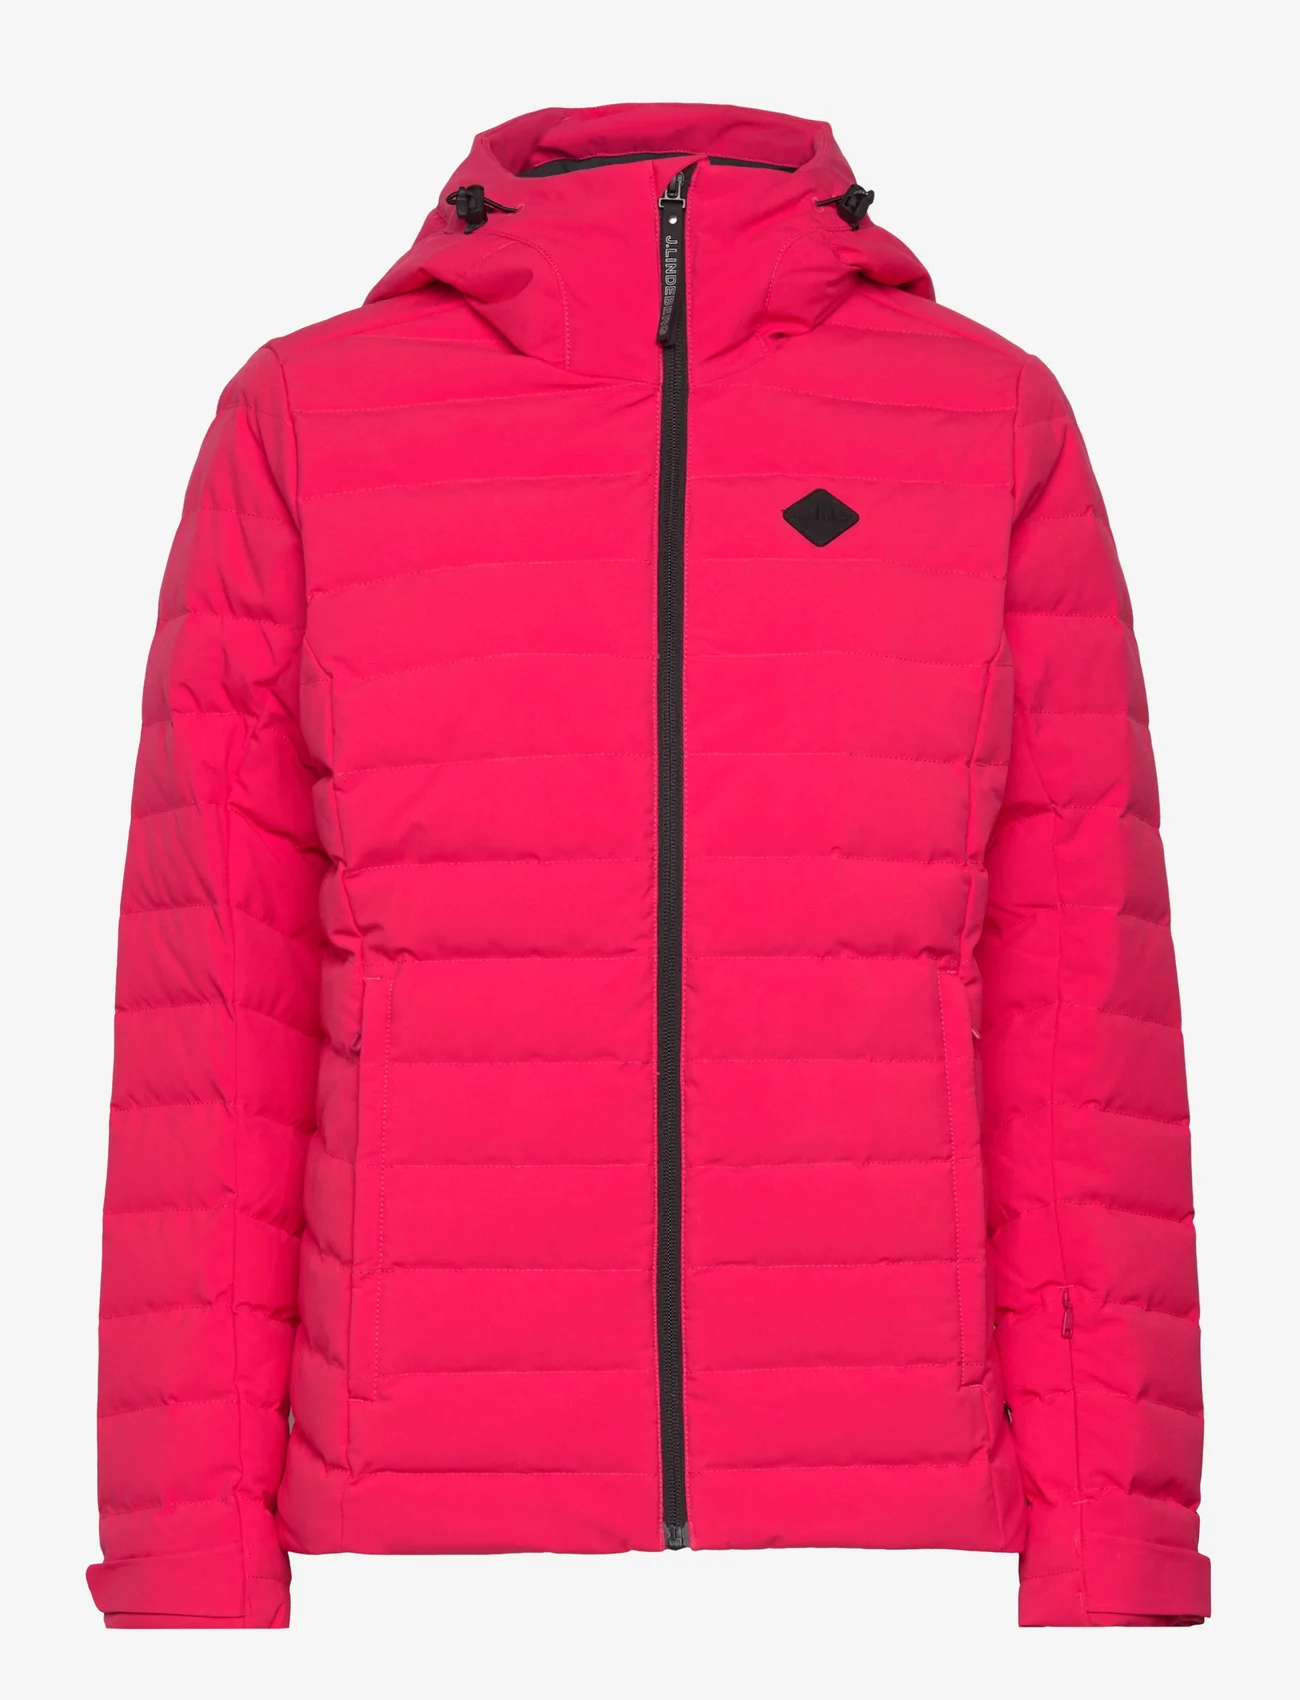 J. Lindeberg - W Thermic Down Jacket - winter jacket - rose red - 0